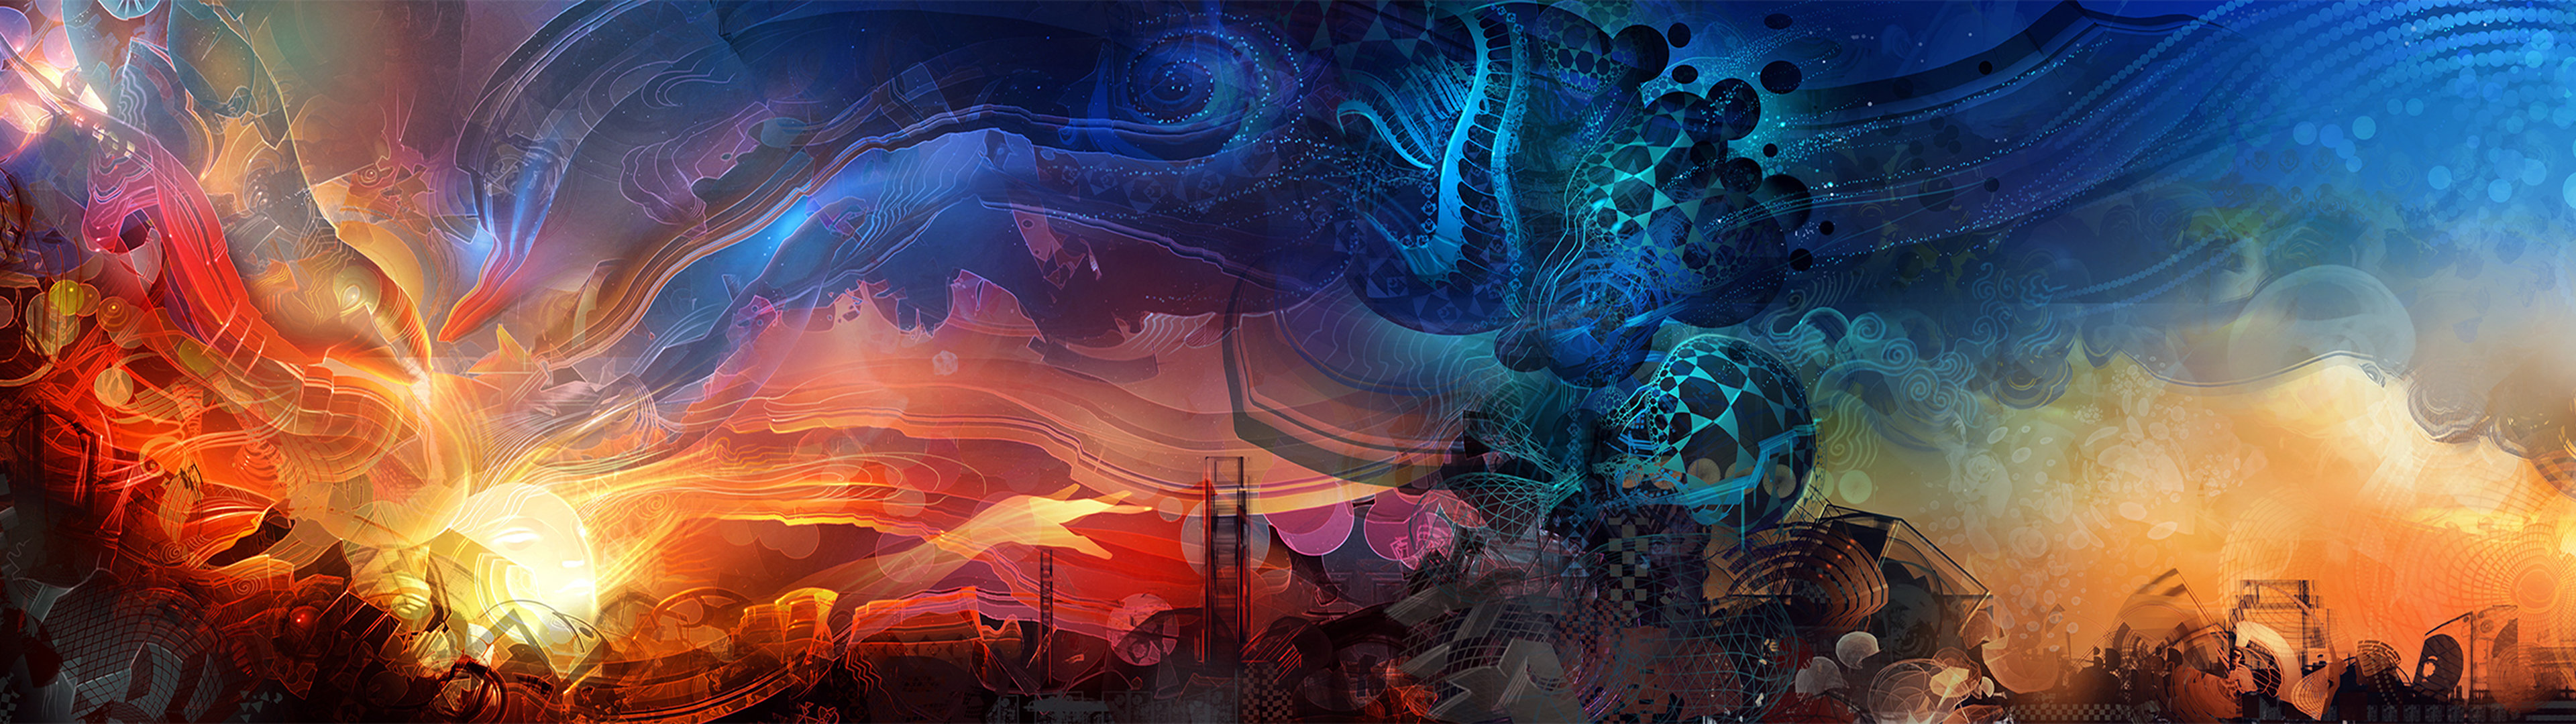 Fantasy Art High Quality Background Id For Dual Screen